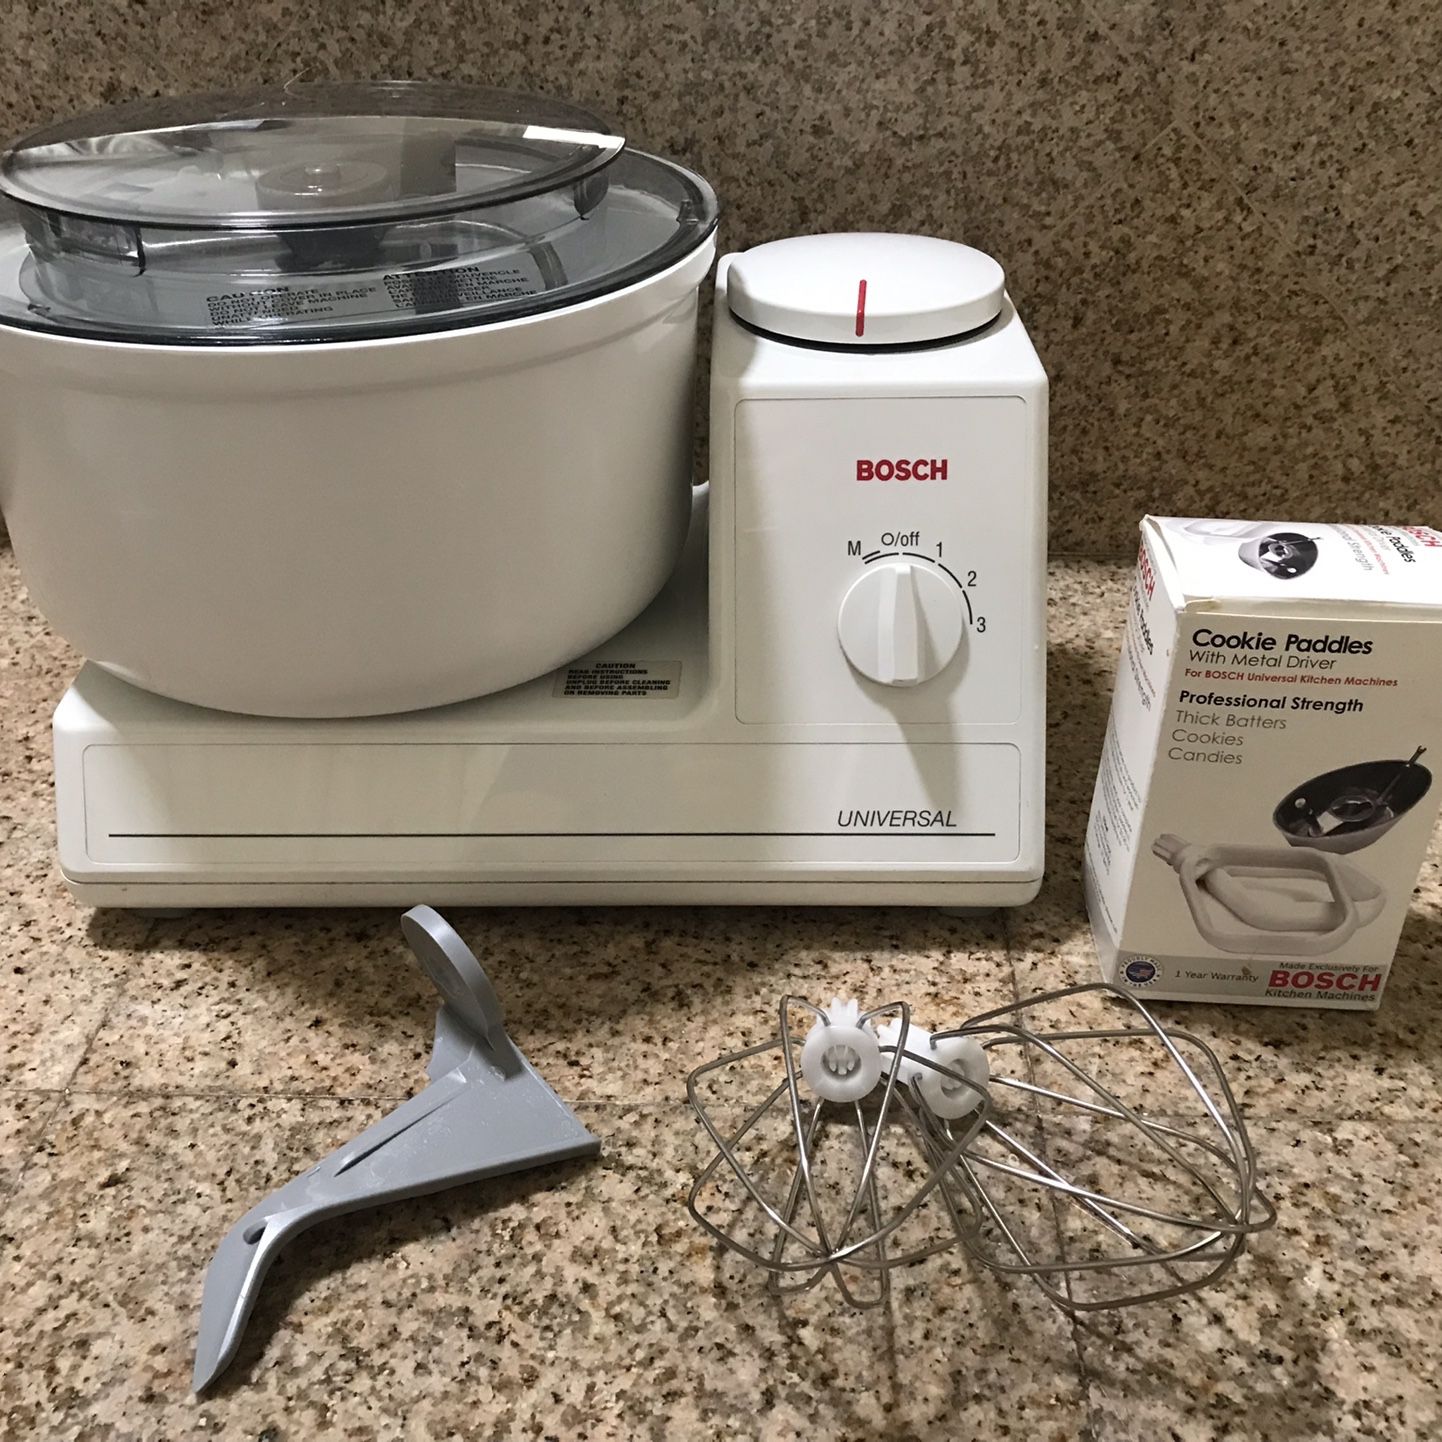 Bosch Mixer Model UM 3 for Sale in Tacoma, WA - OfferUp